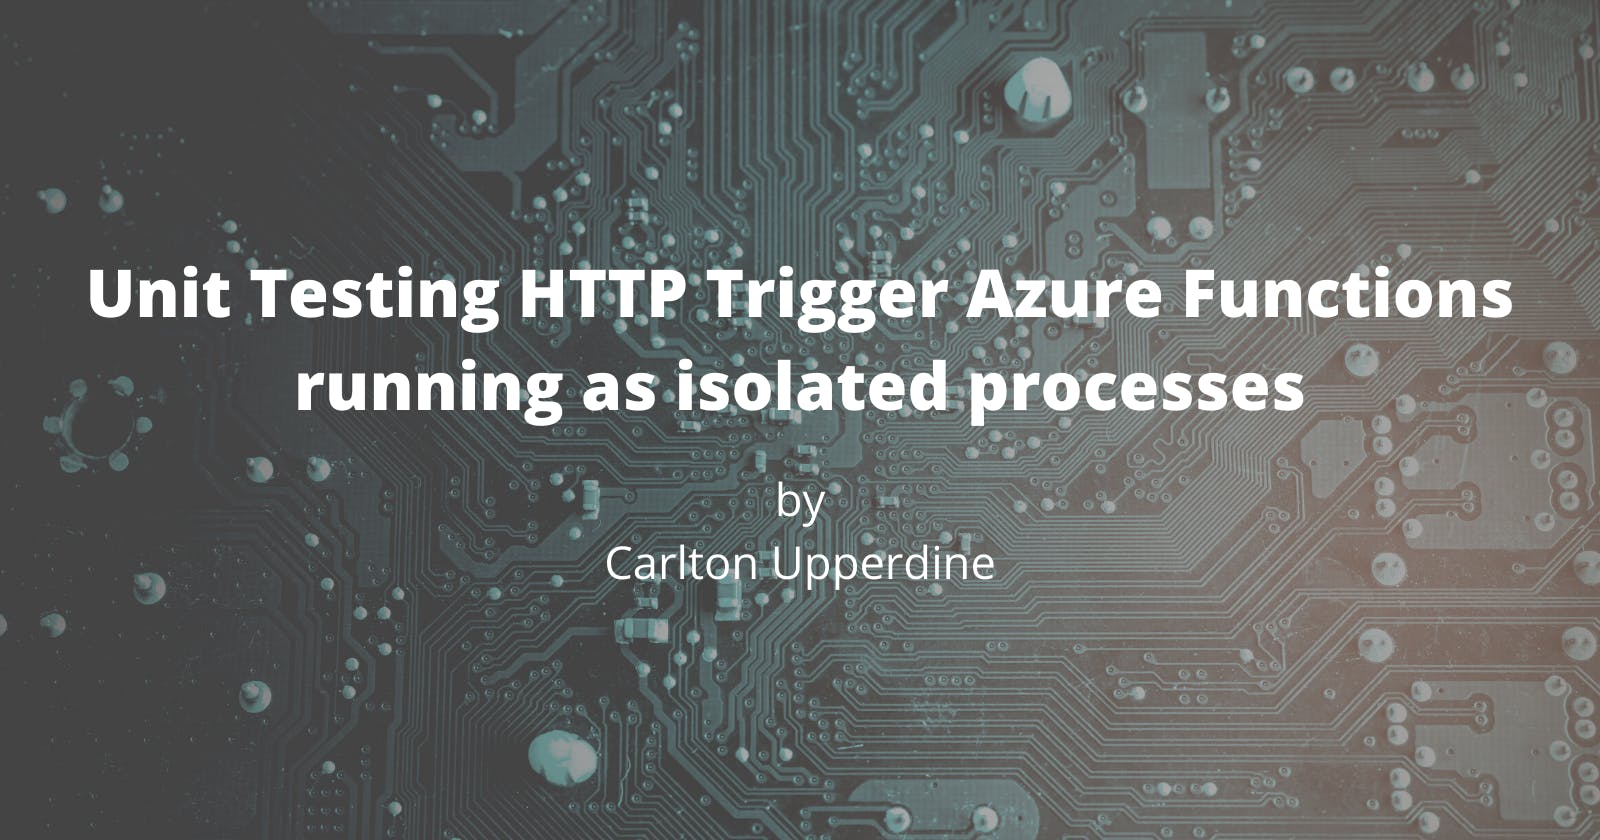 Unit Testing HTTP Trigger Azure Functions running as isolated processes